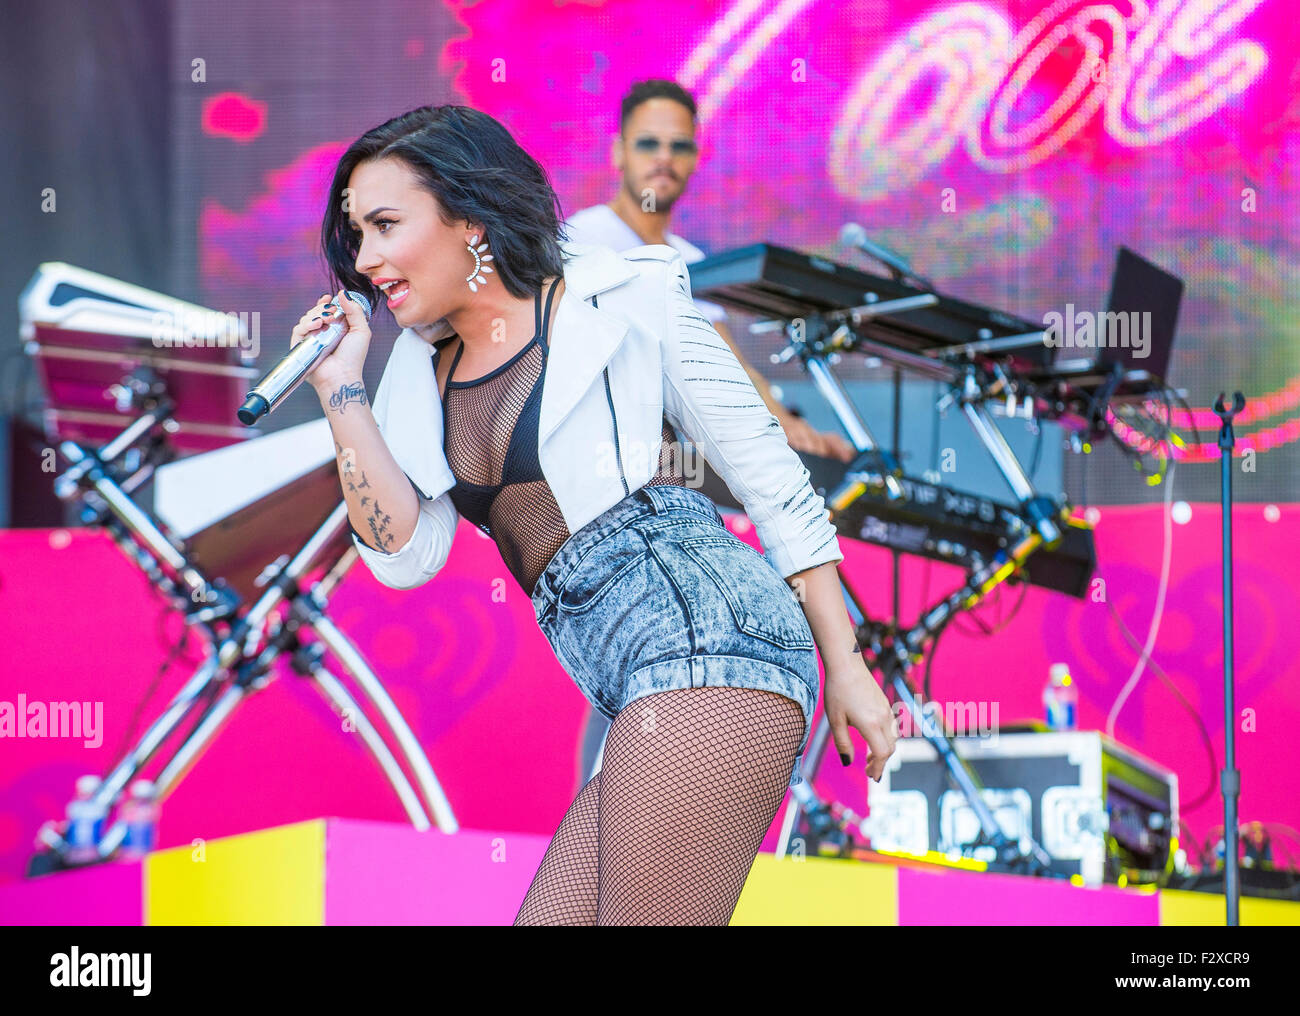 Recording artist Demi Lovato performs onstage at the 2015 iHeartRadio Music Festival at the Las Vegas Village Stock Photo